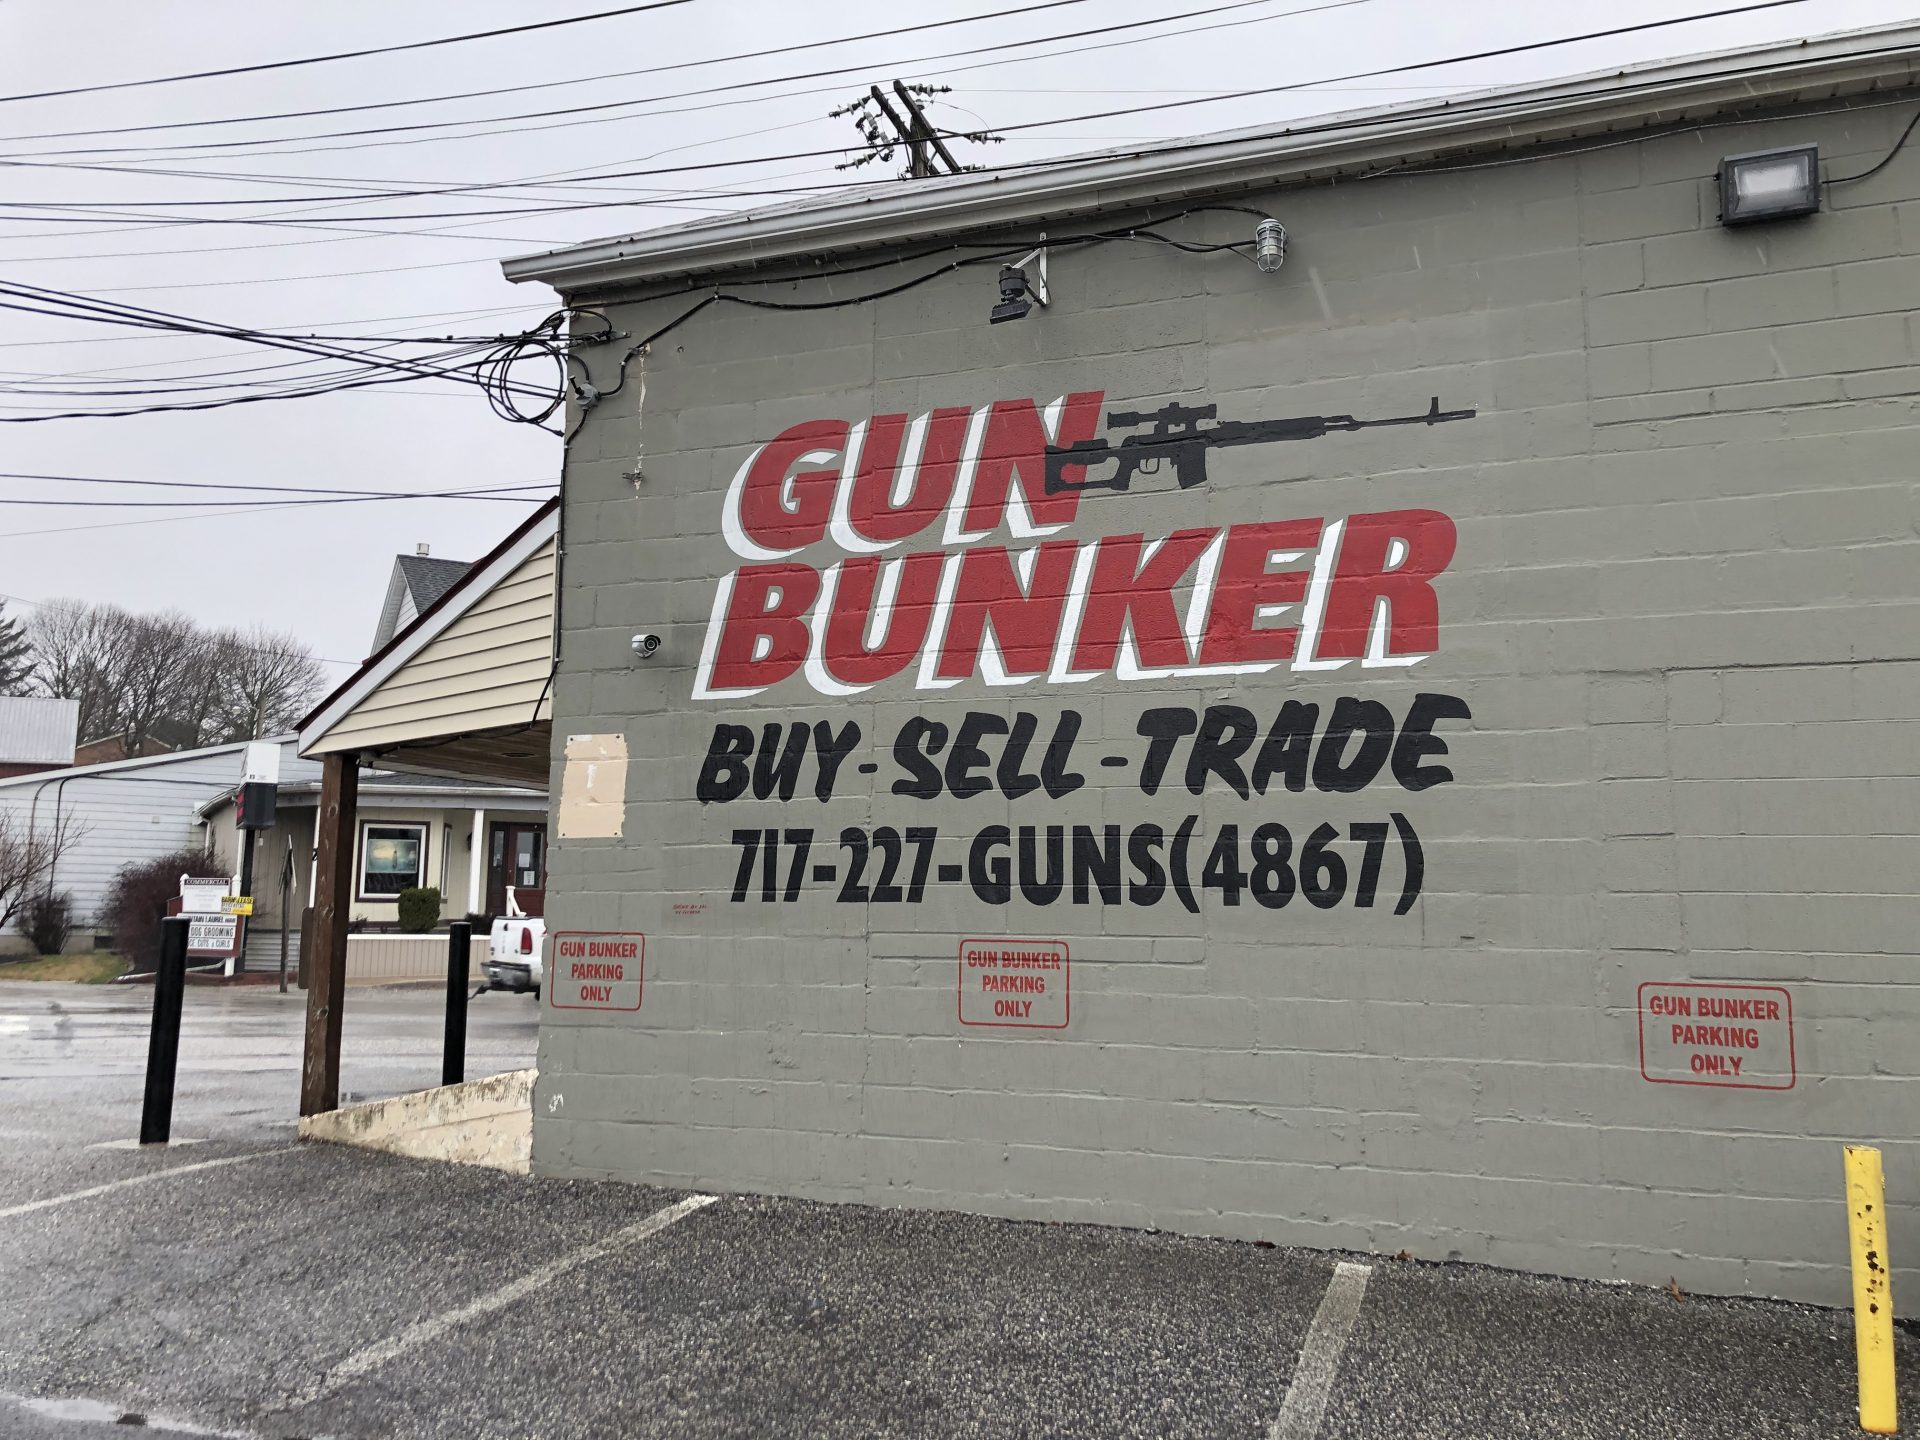 Gun Bunker in Shrewsbury, York County, was closed on March 23, 2020, the first day of enforcement for Gov. Tom Wolf's order to close "non-life sustaining" businesses. On Tuesday, Wolf's said gun shops could open but with restrictions.

Ed Mahon / PA Post